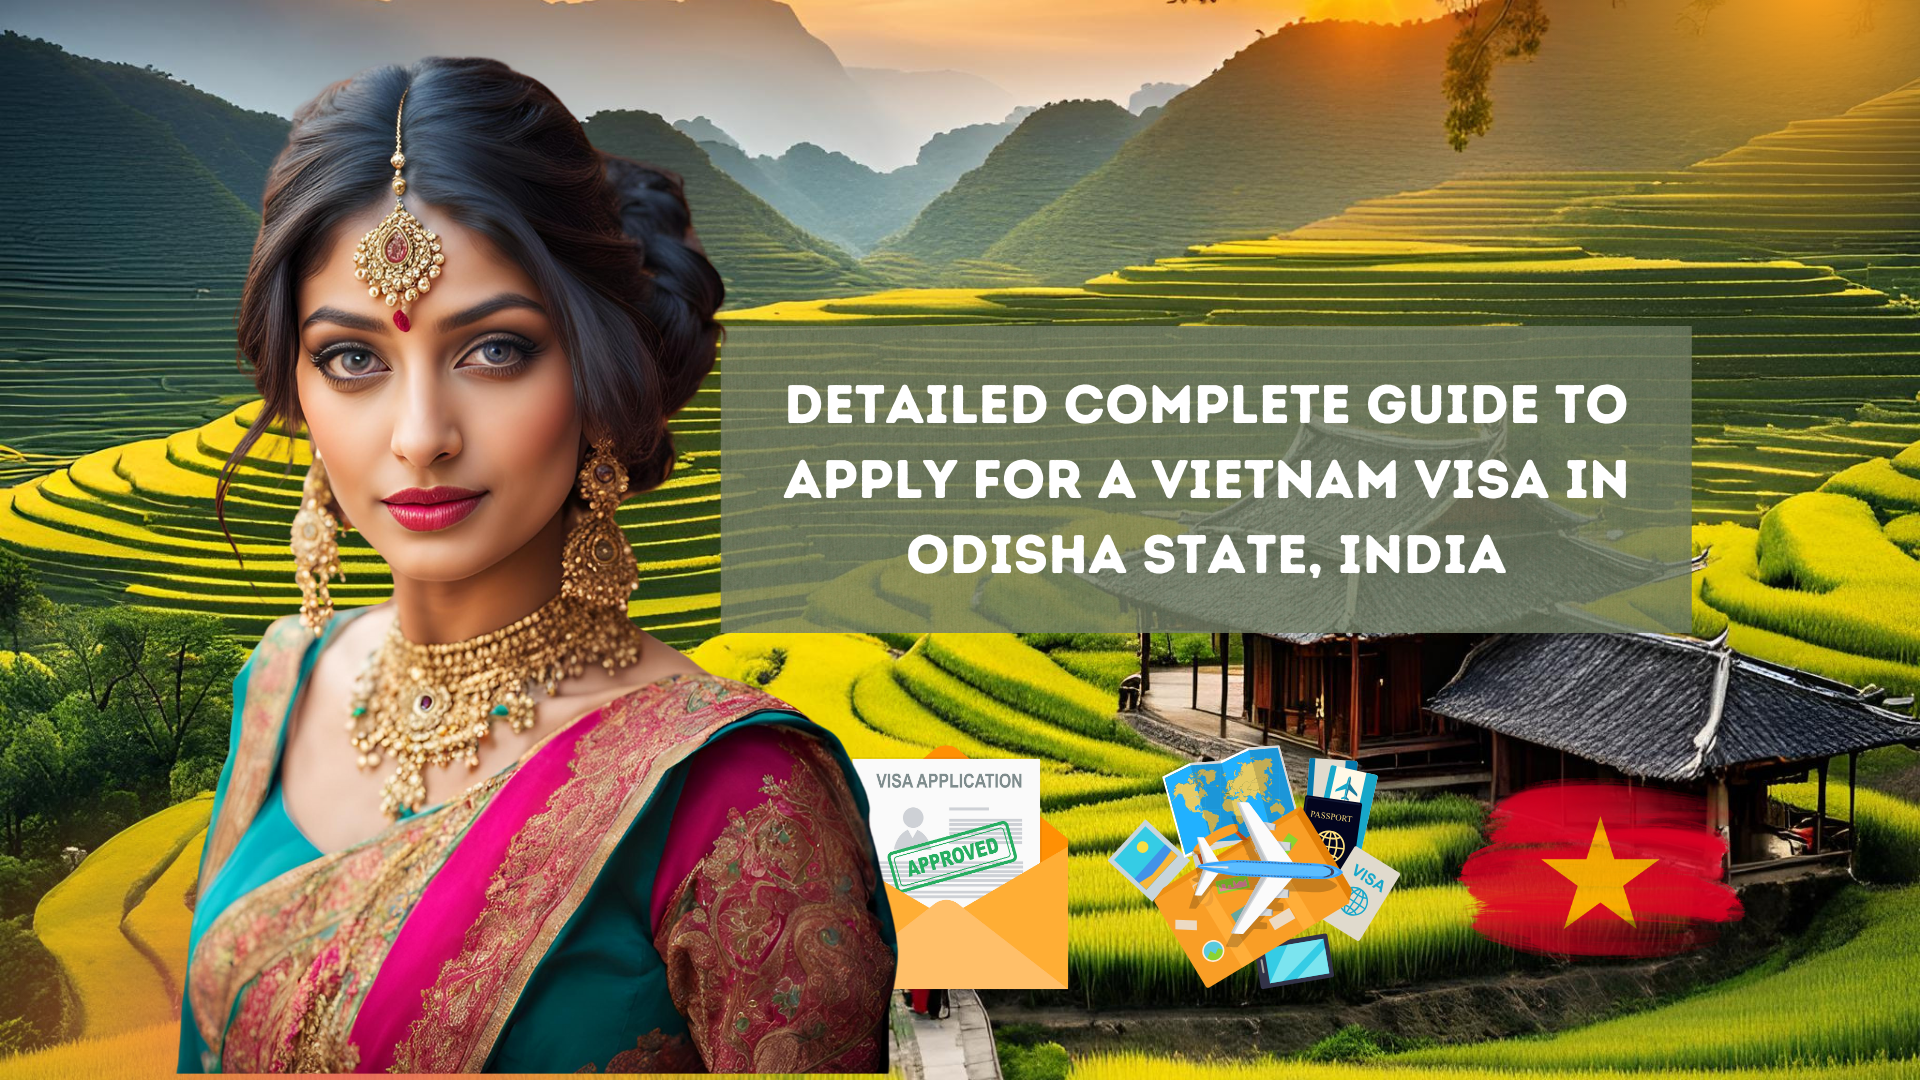 Detailed Complete Guide to Apply for a Vietnam Visa in Odisha State, India